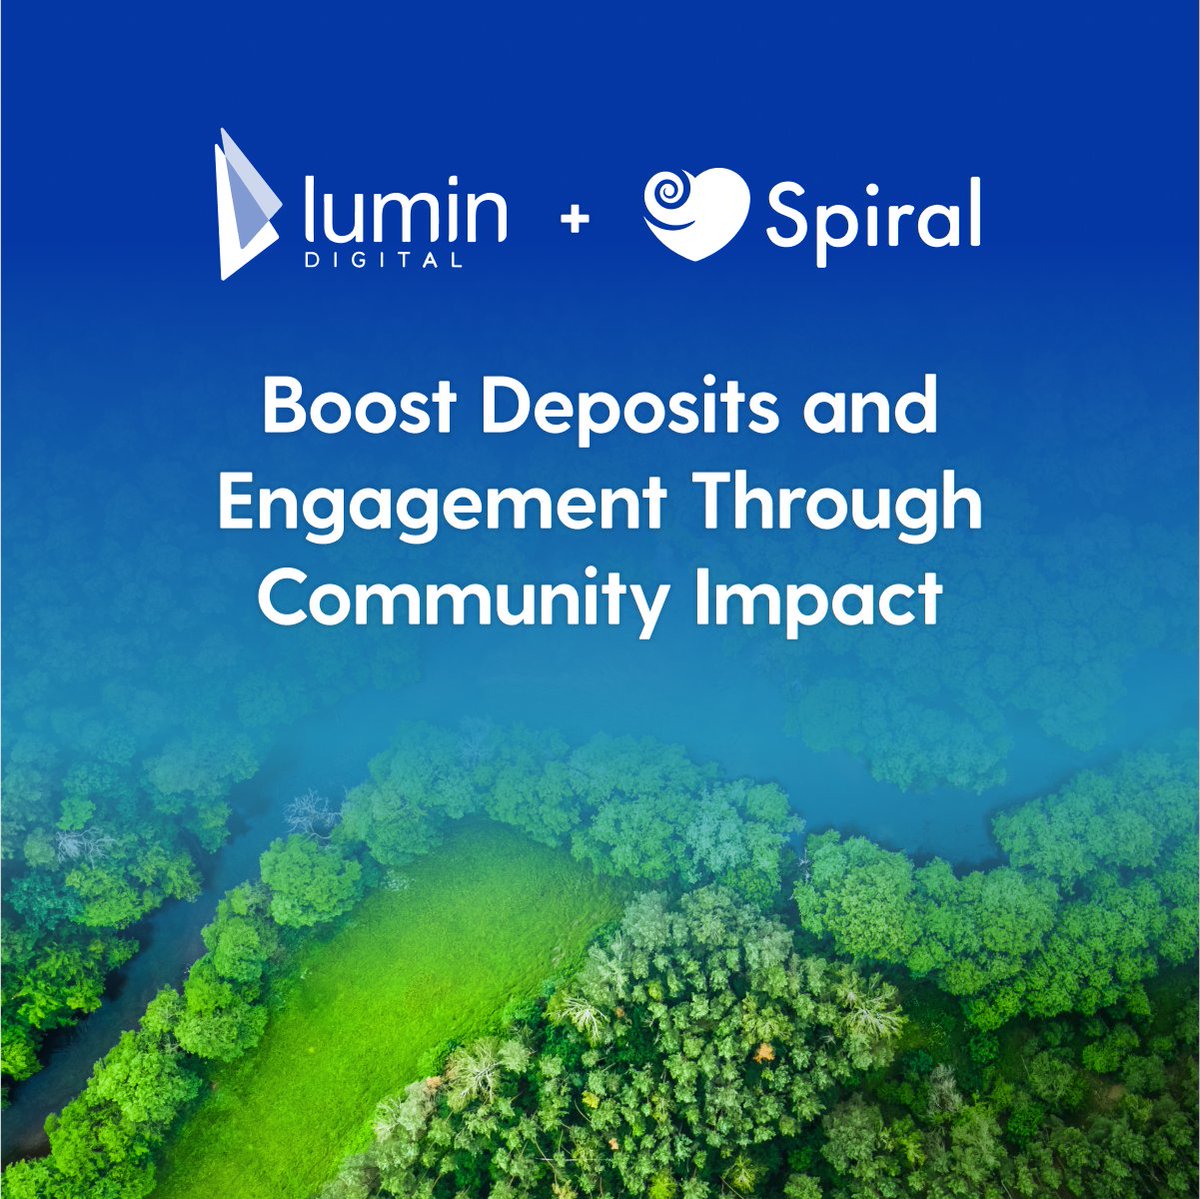 We're excited to announce our integration with Lumin Digital’s Banking Platform! 🎉⁠ This turnkey integration will help Lumin’s customers boost their deposits and engagement through community and environmental impact.⁠ 🌱⁠ bit.ly/3P0ohFq #fintech #digitalbanking